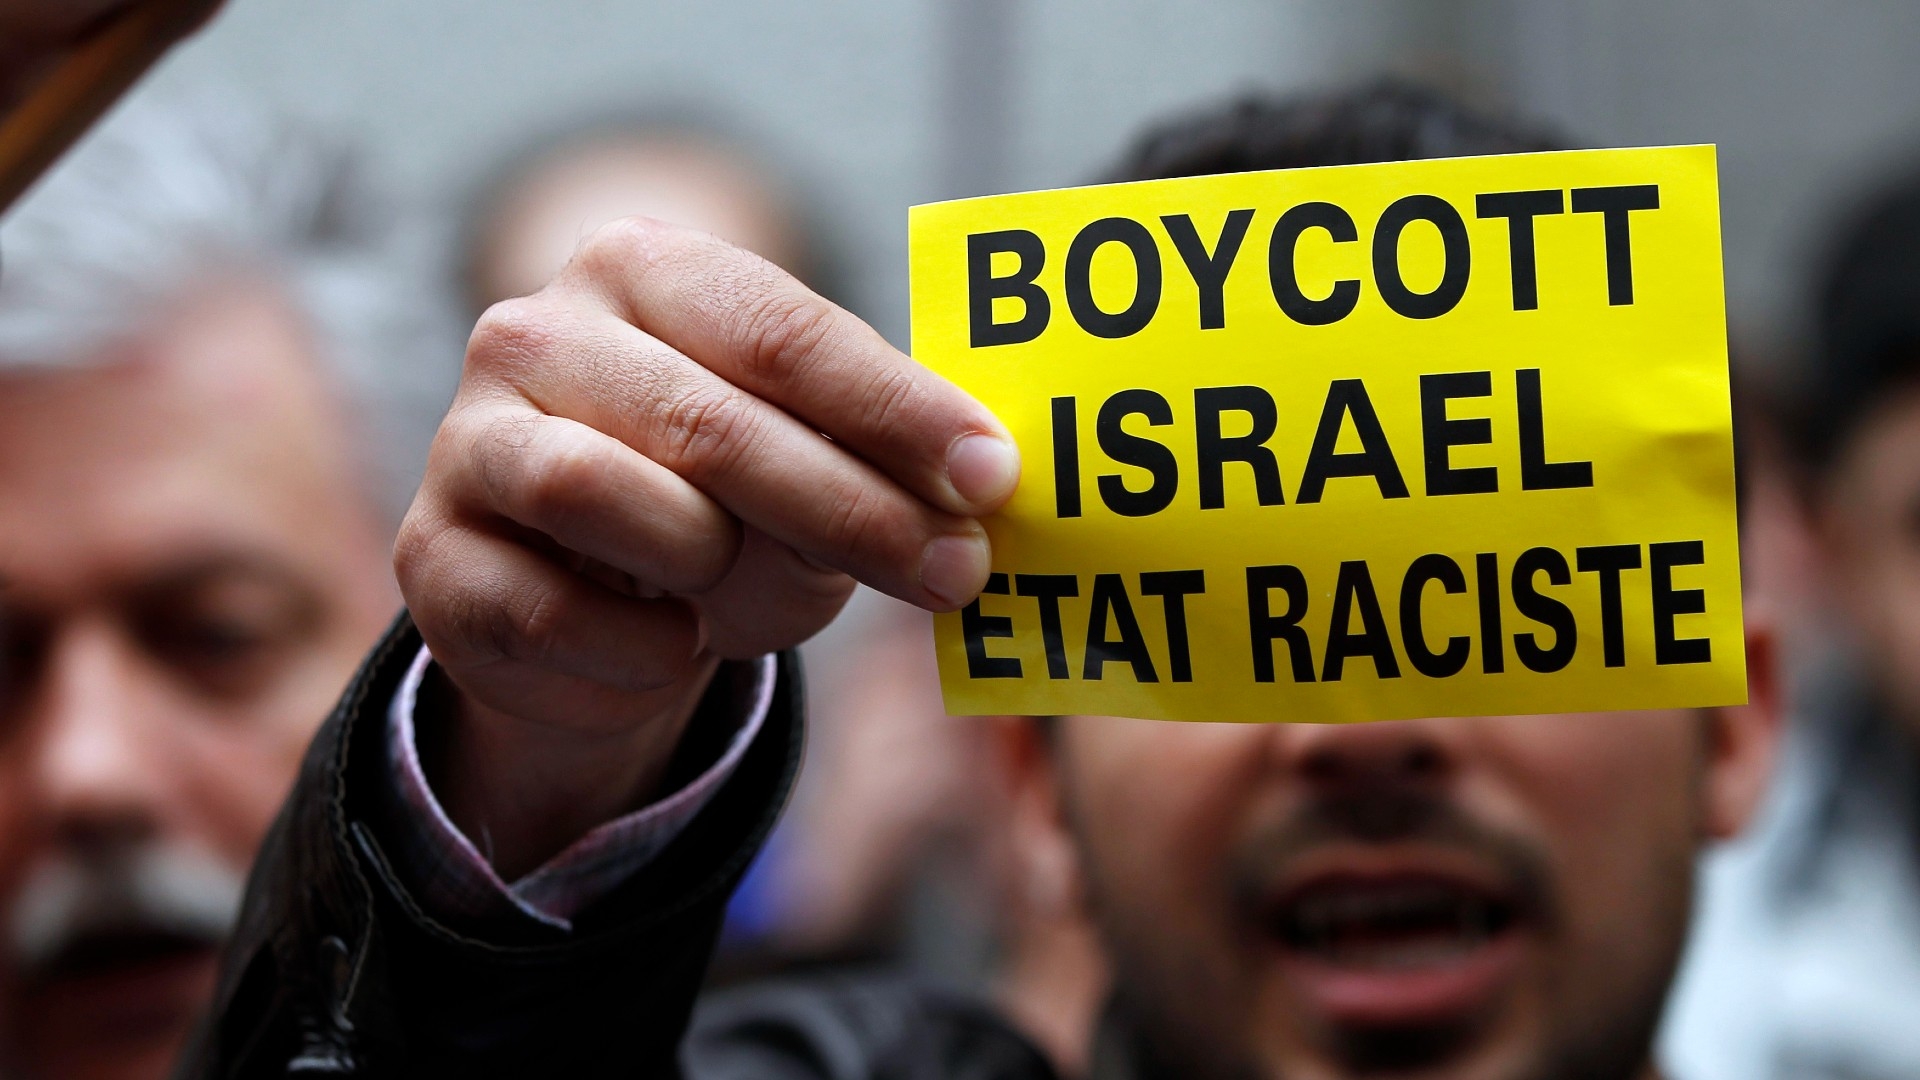 A demonstrator displays a sign reading "Boycott Israel, racist state" outside the Belgian foreign affairs building during a protest in Brussels in 2010 (Reuters)